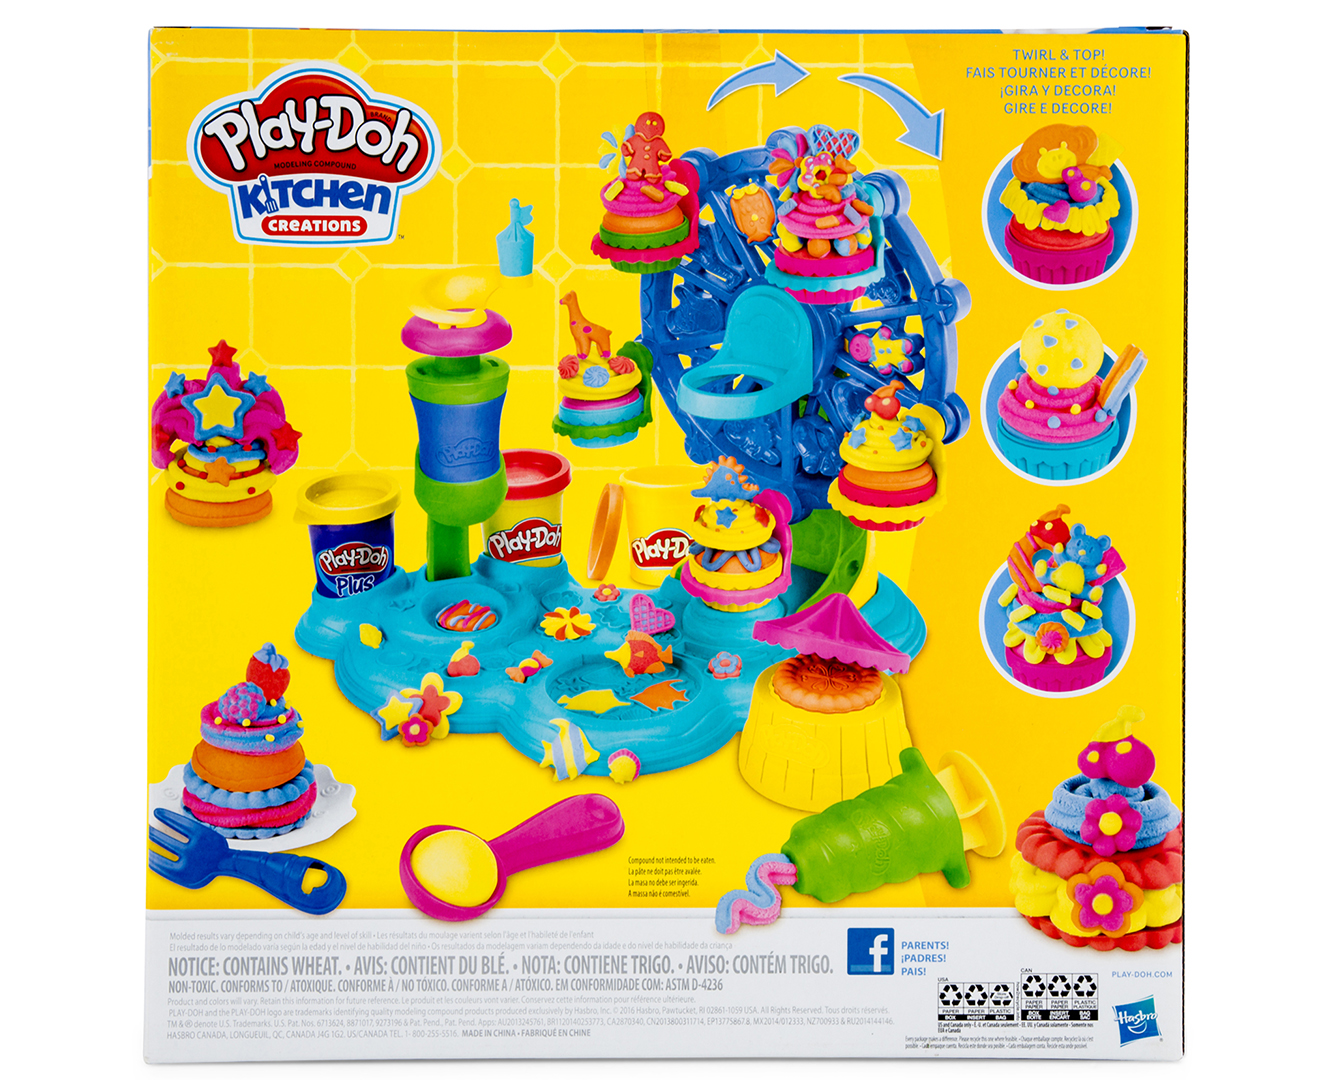 play doh playsets